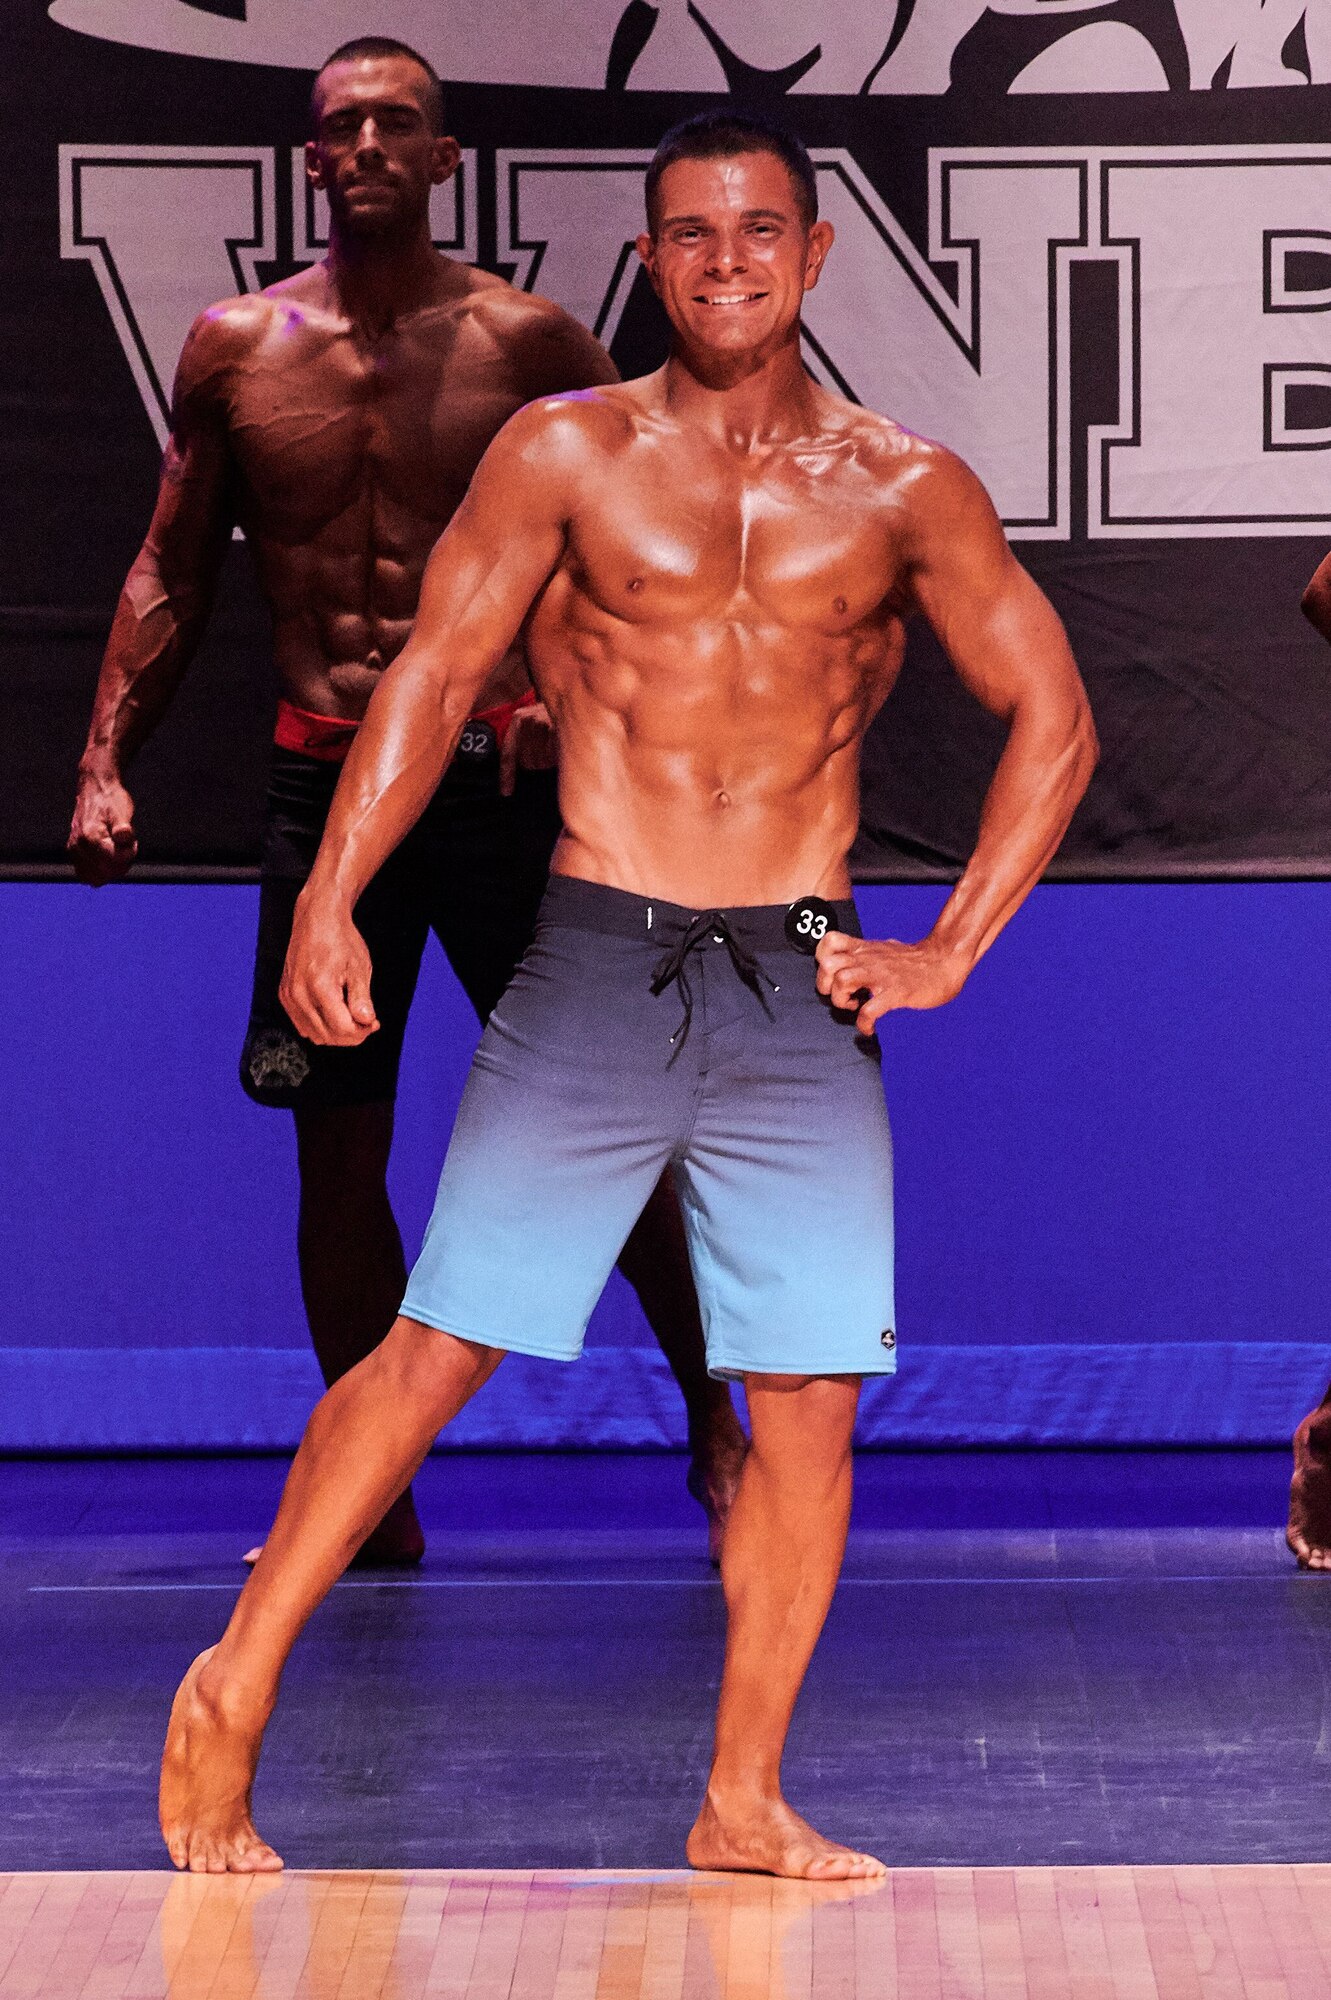 Major Richard Bottinelli, 90th Force Support Squadron operations officer, poses at the Orlando Bodybuilding Competition, in Orlando, Fla., Aug. 10, 2019. Bottinelli earned third overall in his competing categories and plans to compete again next year. (Courtesy photo)